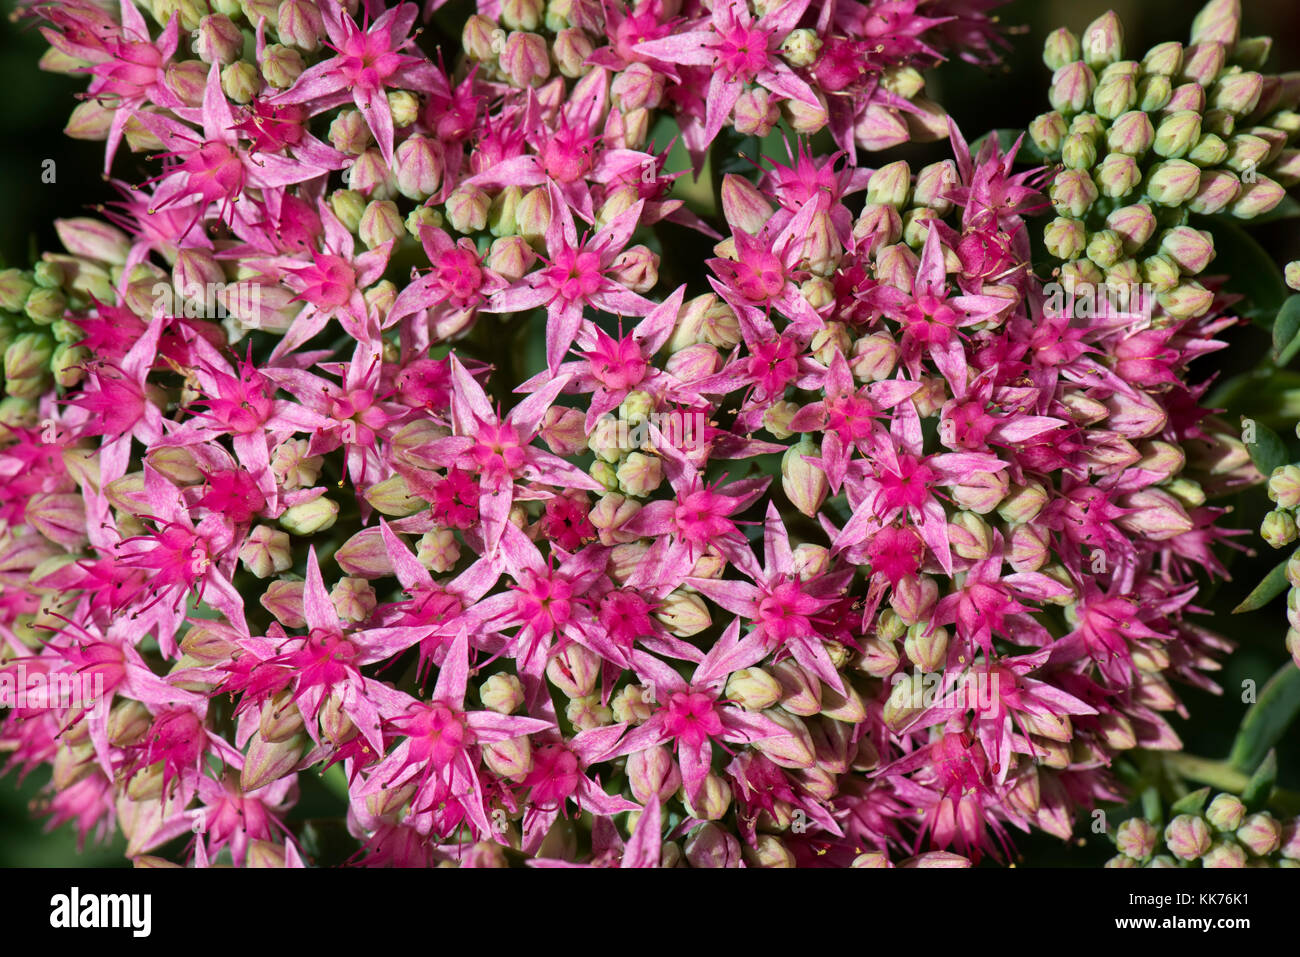 Star-shaped flowers of orpine, Hylotelephium spectabile 'Carl', a succulent ornamental plant flowering in late summer, August Stock Photo